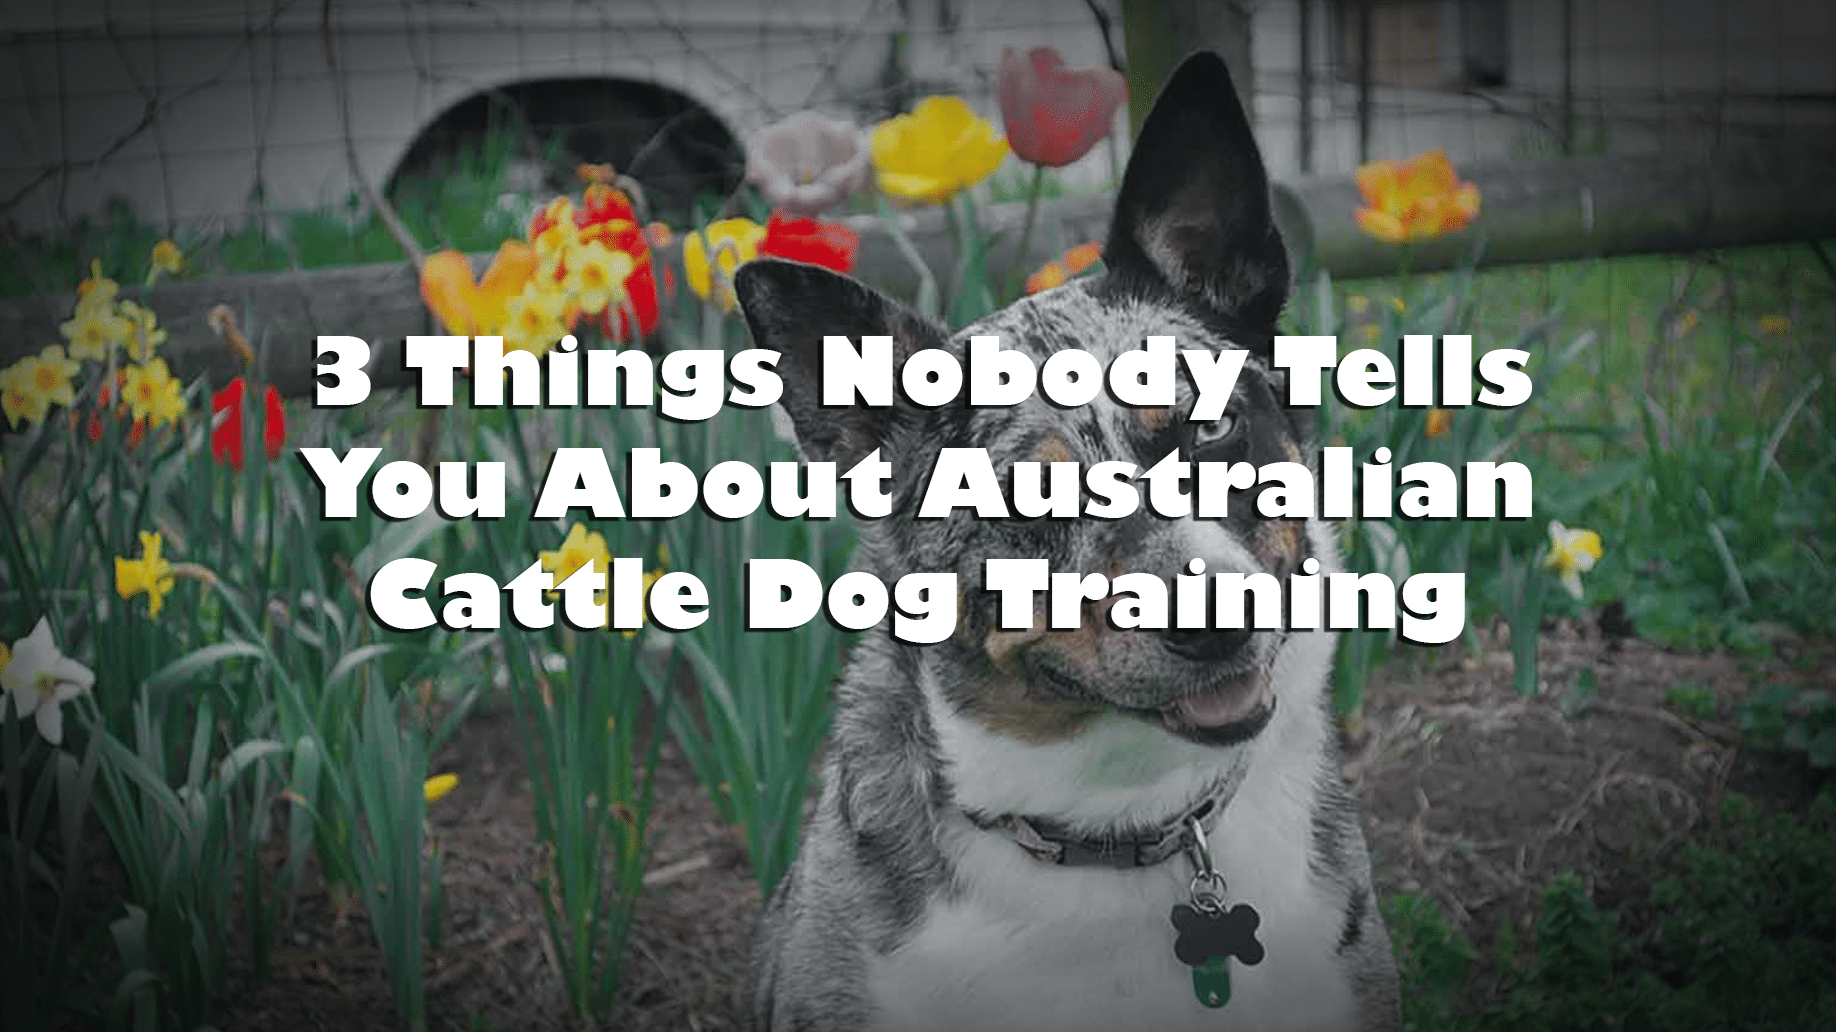 3 Things Nobody Tells You About Australian Cattle Dog Training